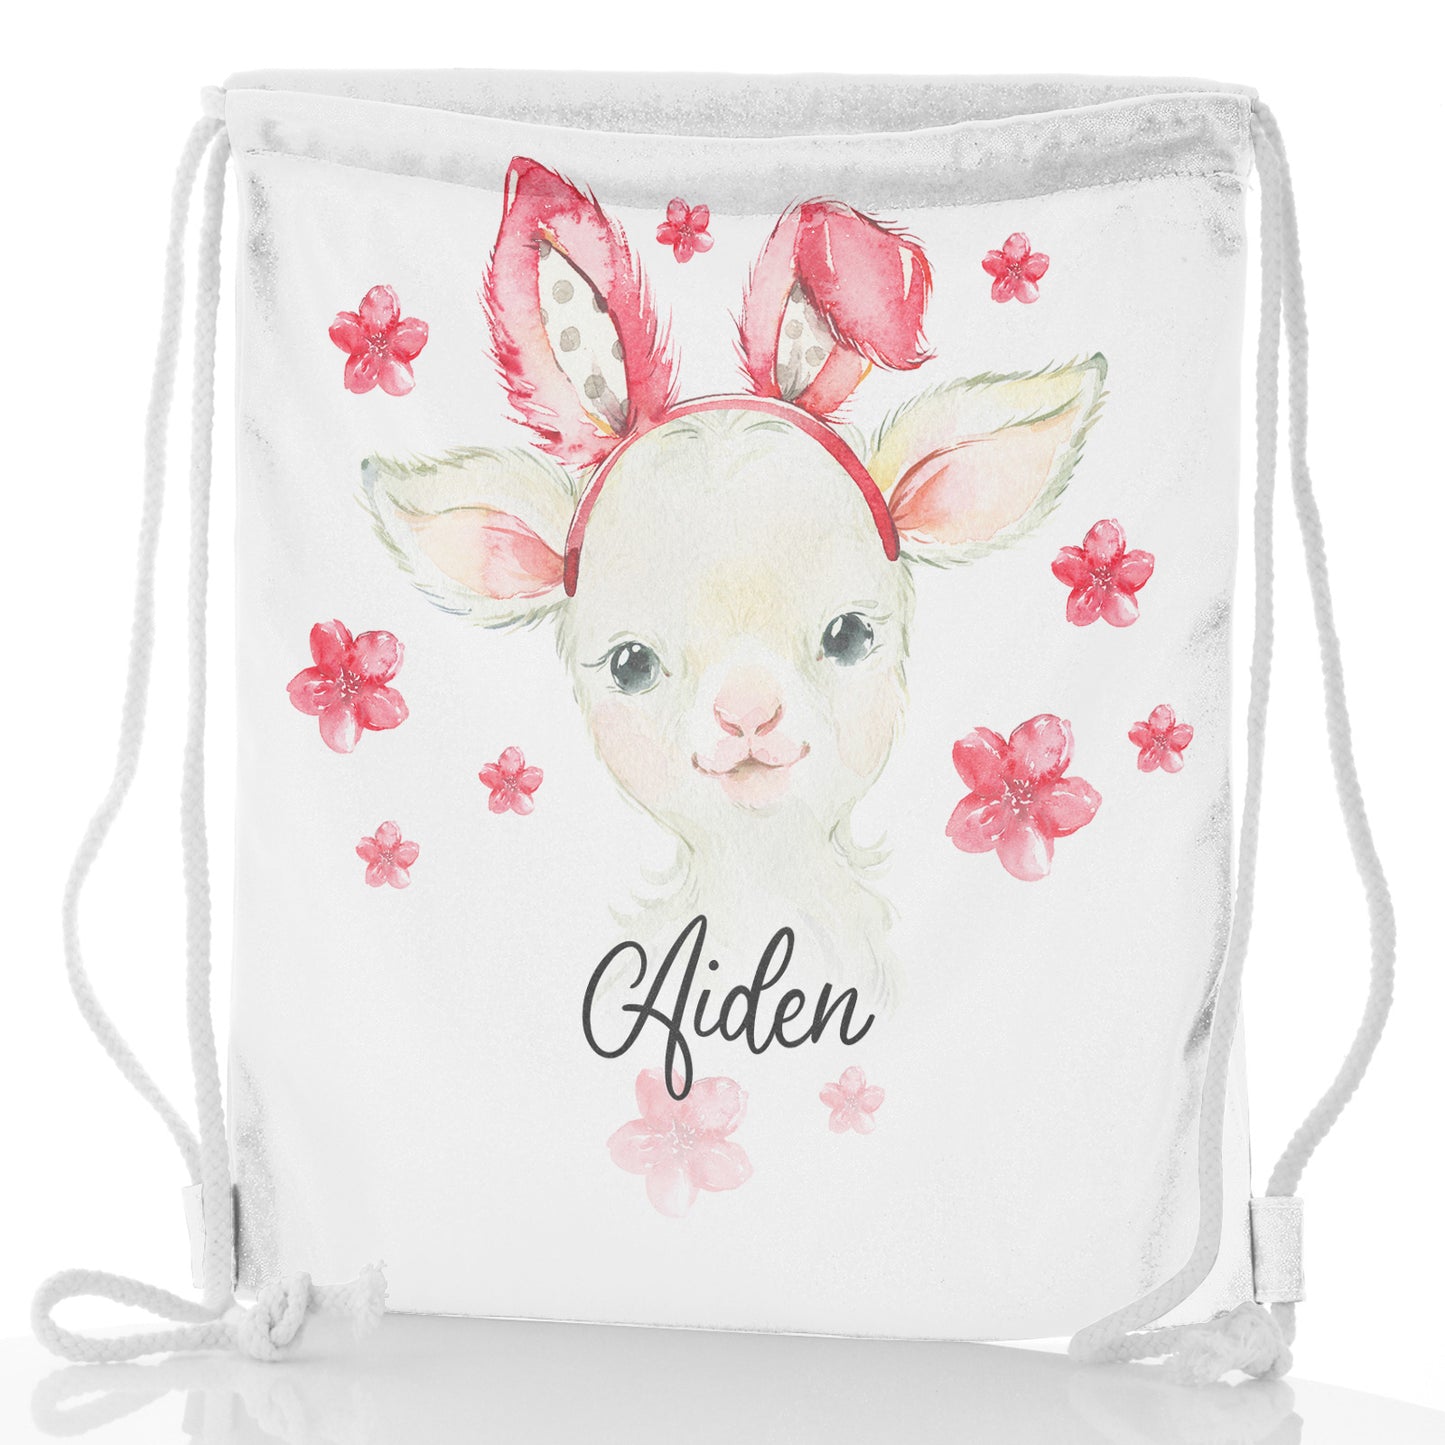 Personalised Glitter Drawstring Backpack with White Lamb Pink Bunny Ears and Flowers and Cute Text